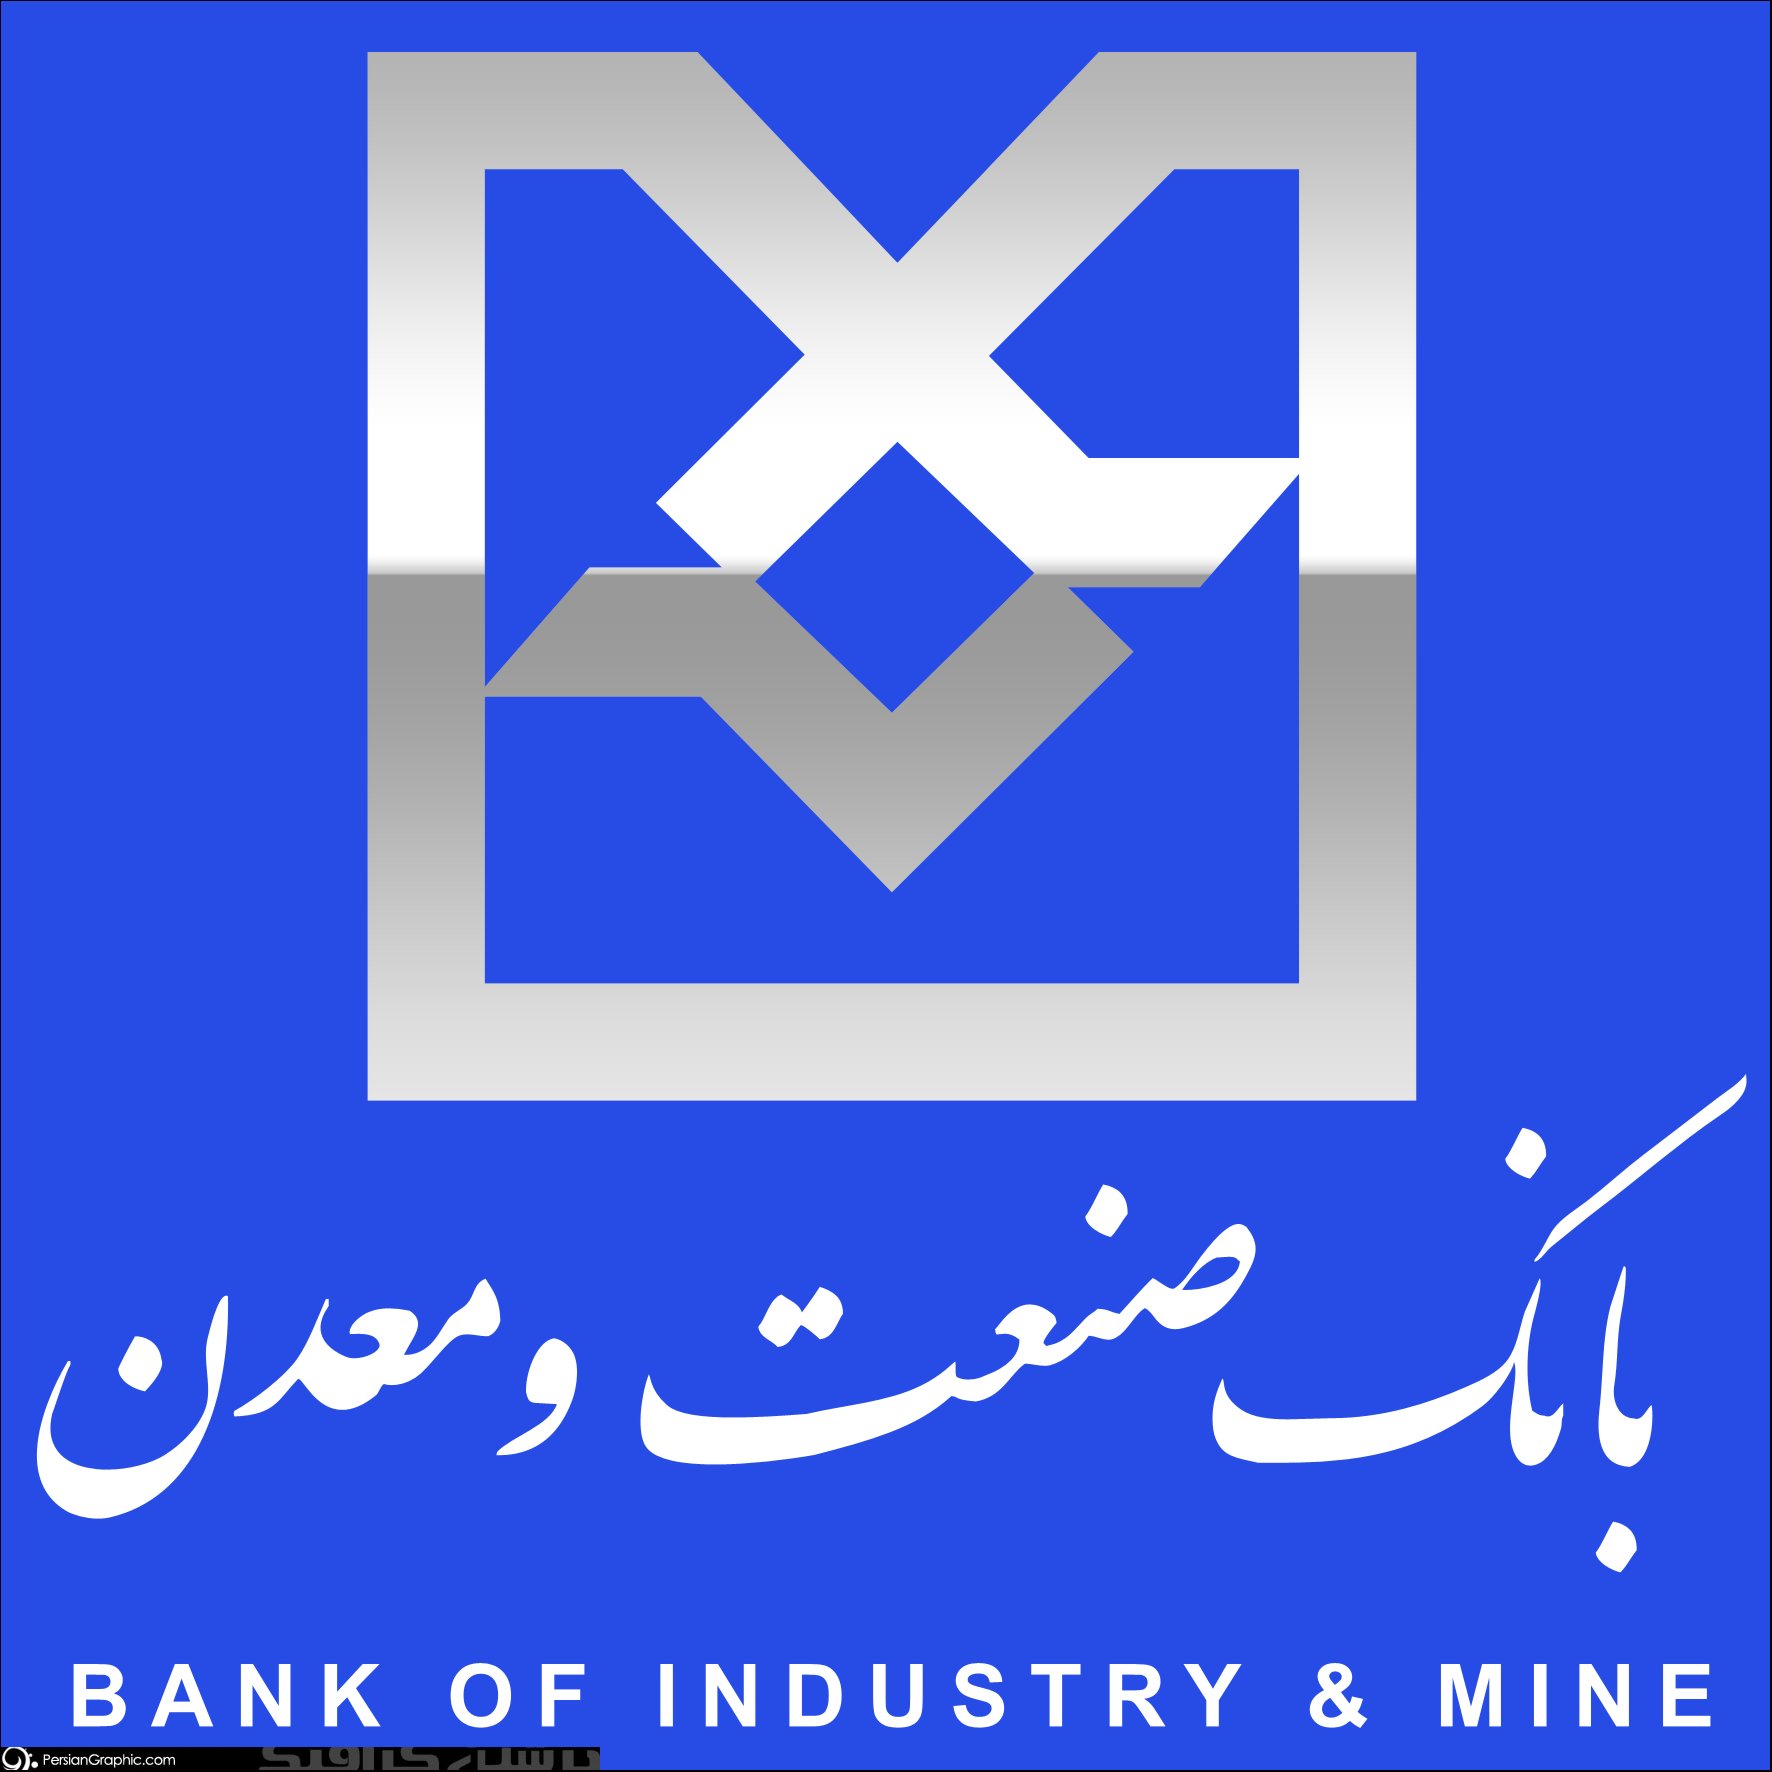 Facilities of the Industry and Mine Bank for 21 industrial projects in 14 provinces of the country